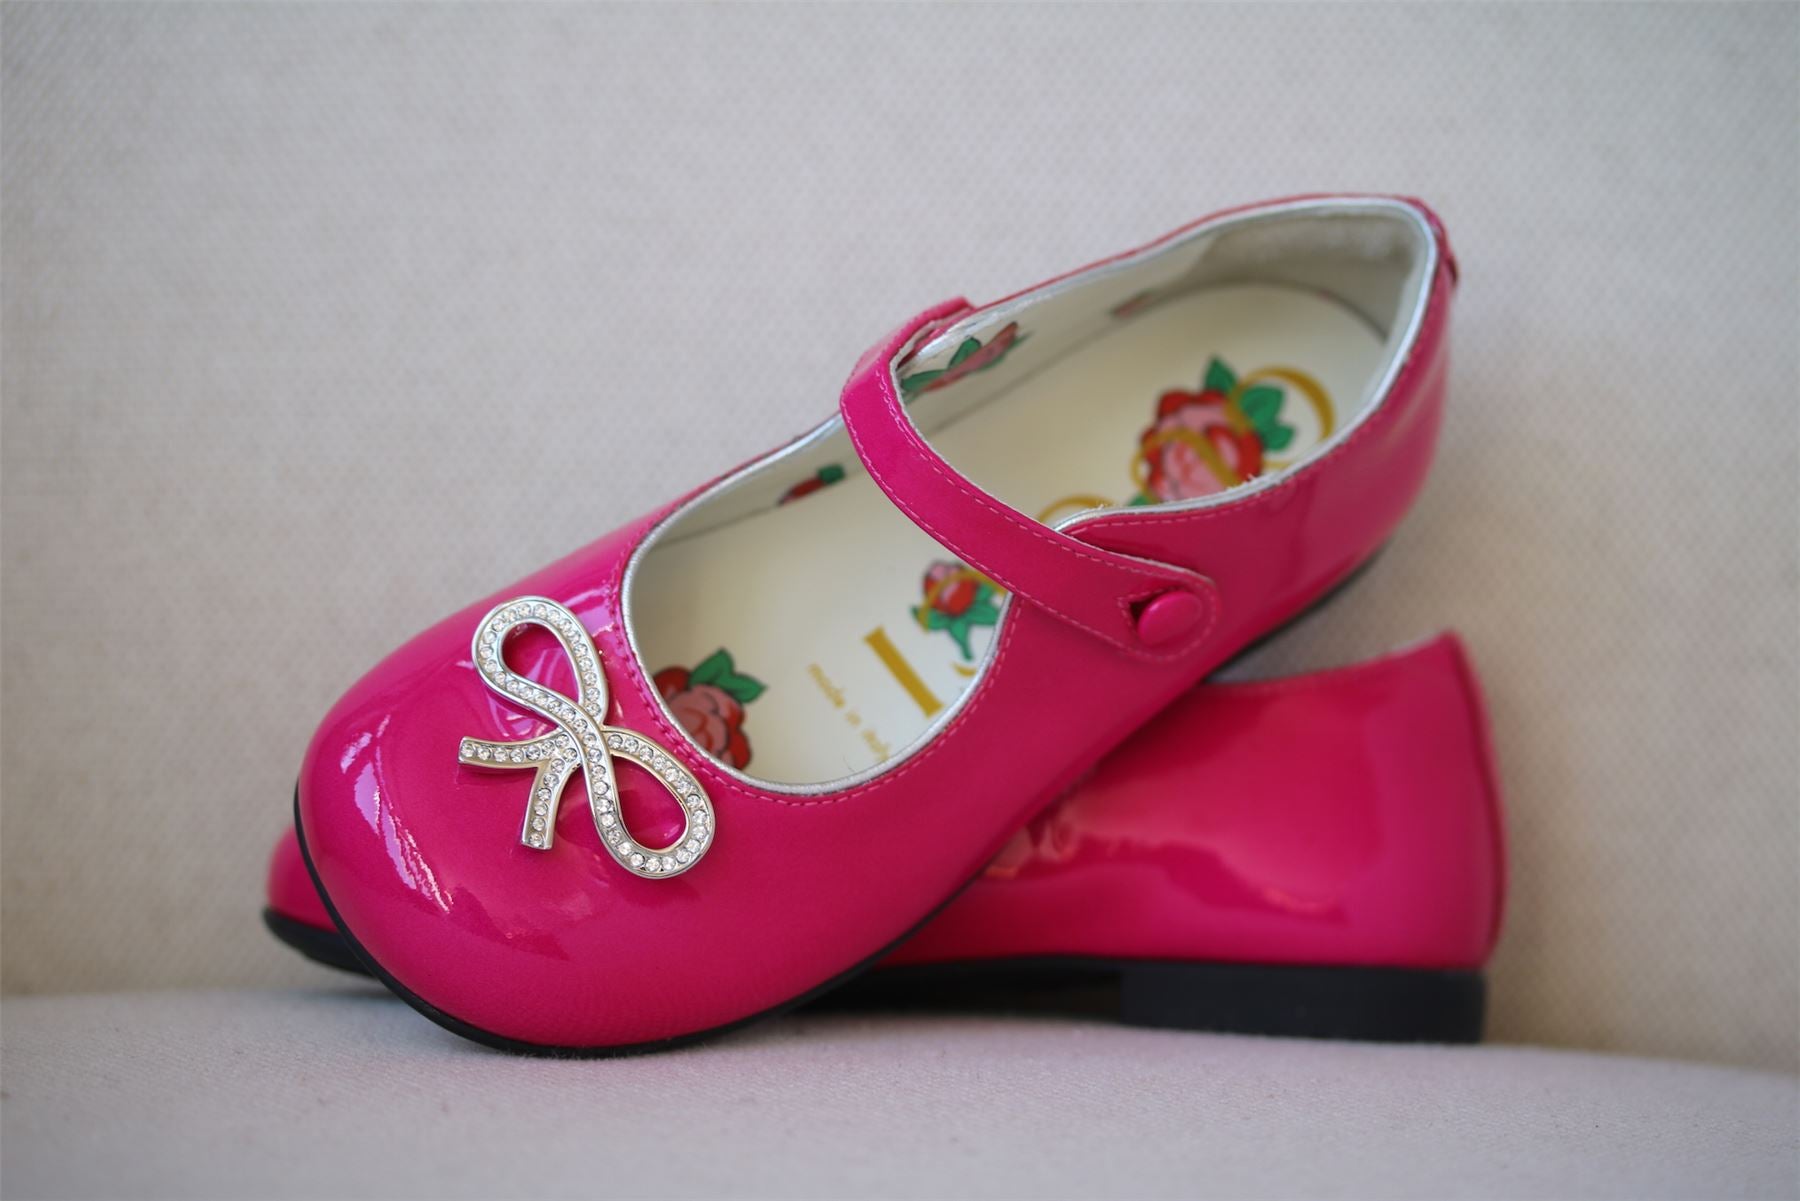 GUCCI GIRLS PINK CRYSTAL BOW LEATHER SHOES EU 25 UK 8